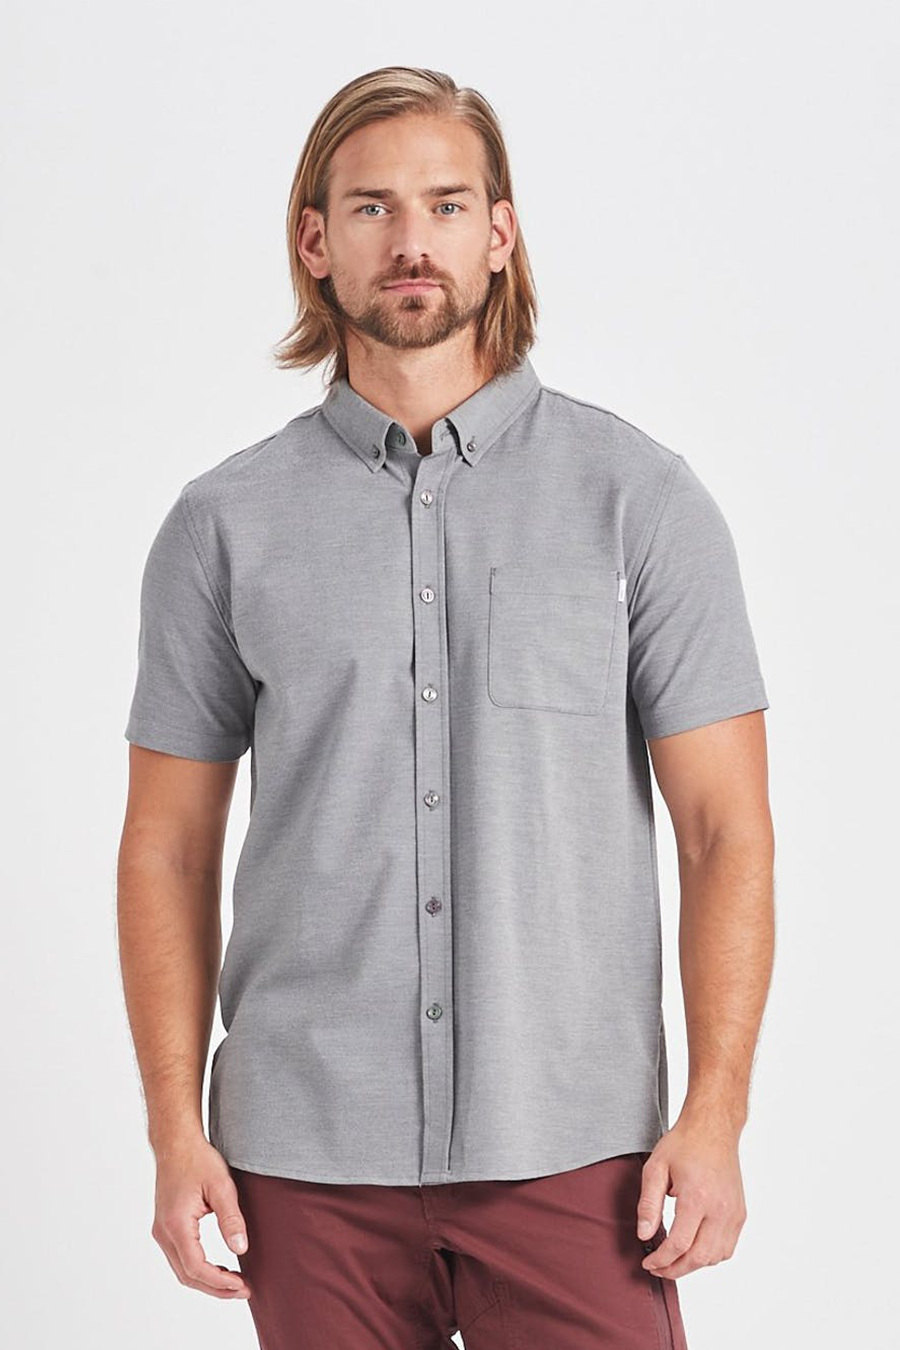 Bishop Button Down | Light Grey - Main Image Number 1 of 3